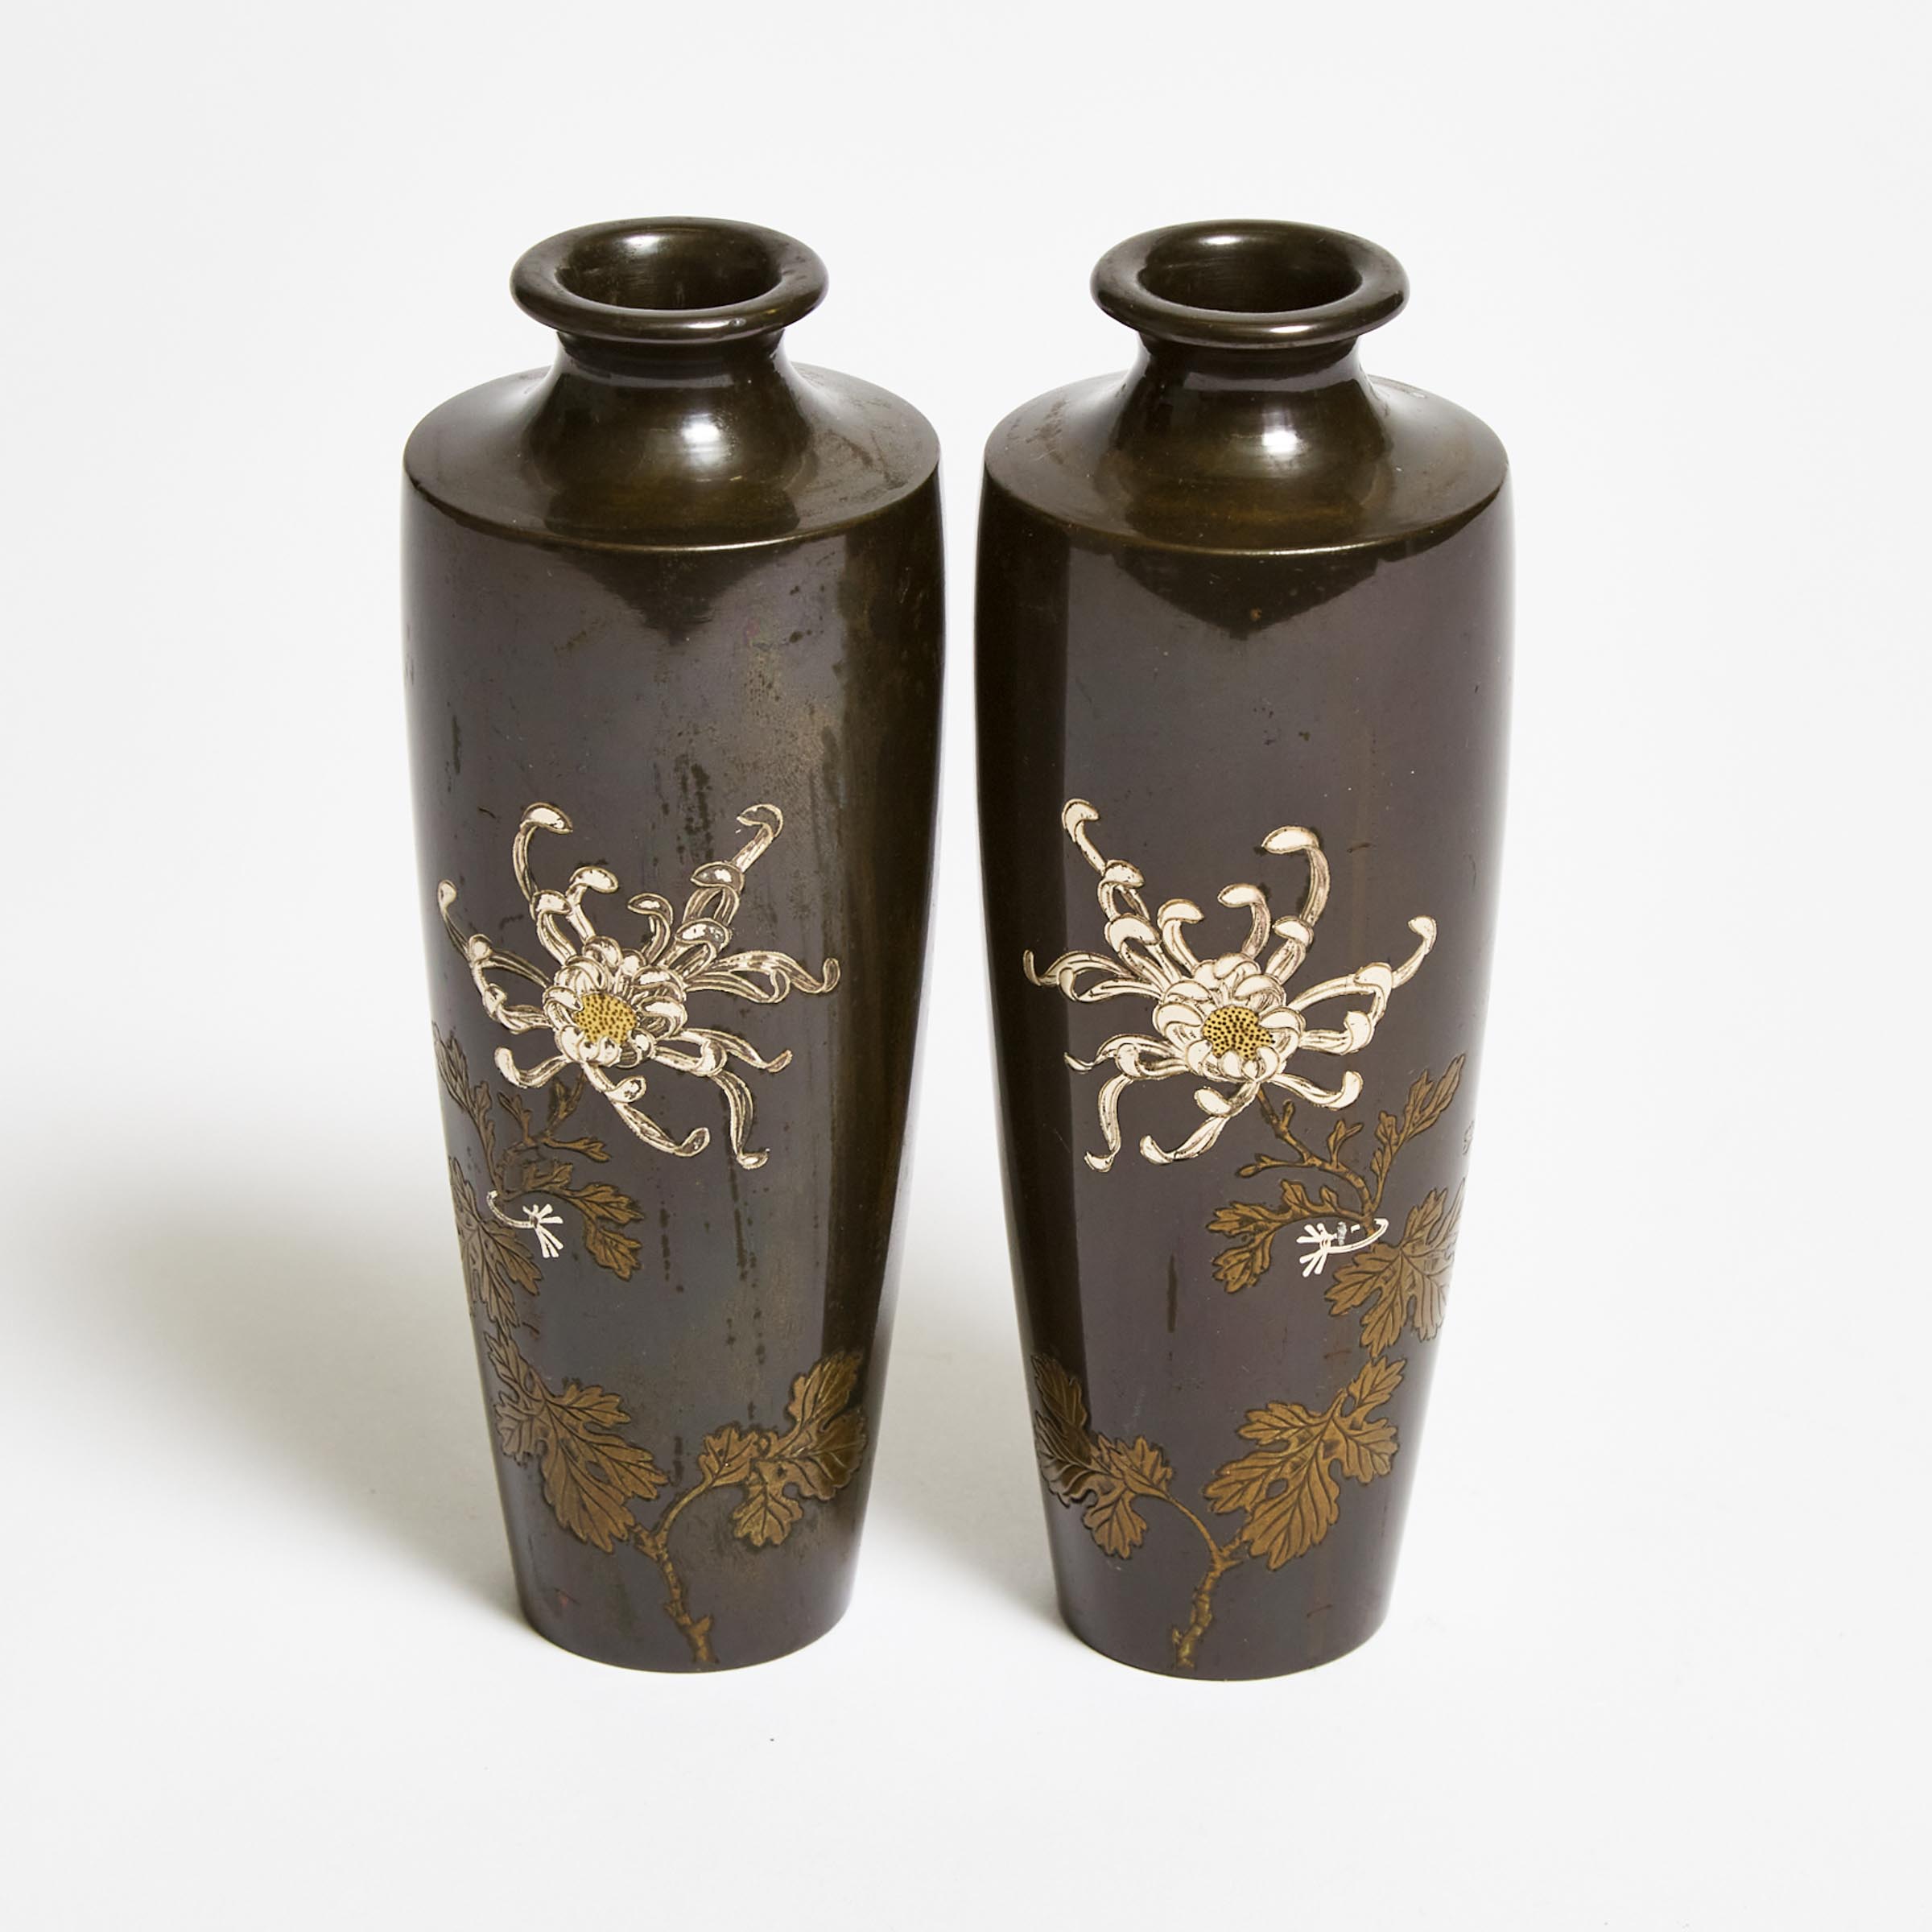 A Pair of Japanese Mixed-Metal Inlaid Bronze Vases, Meiji Period (1868-1912)